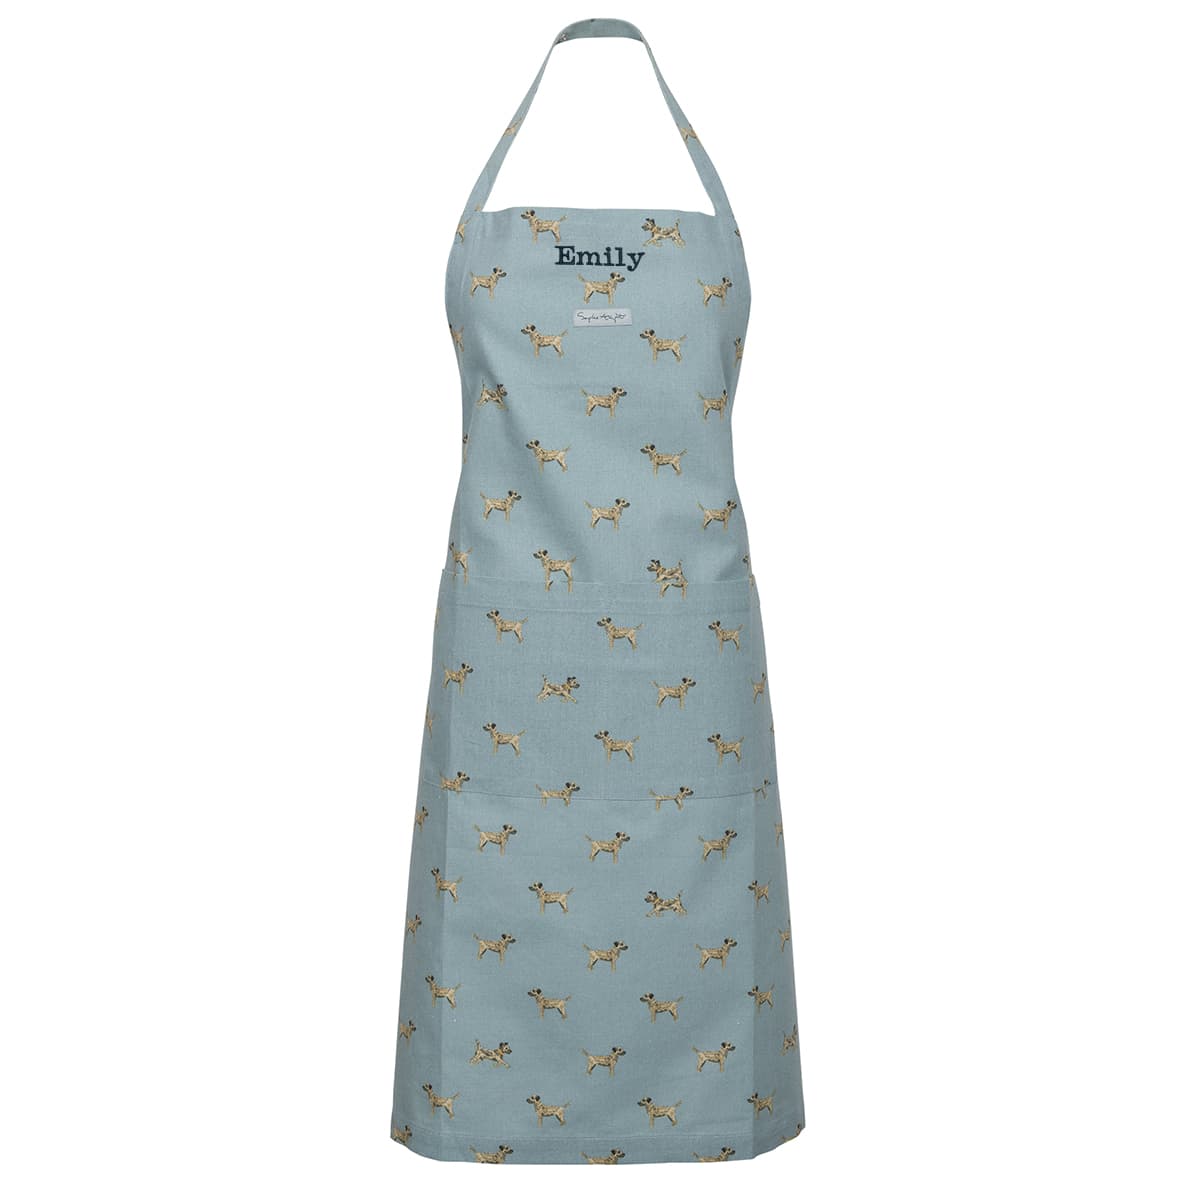 Terriers Adult Apron